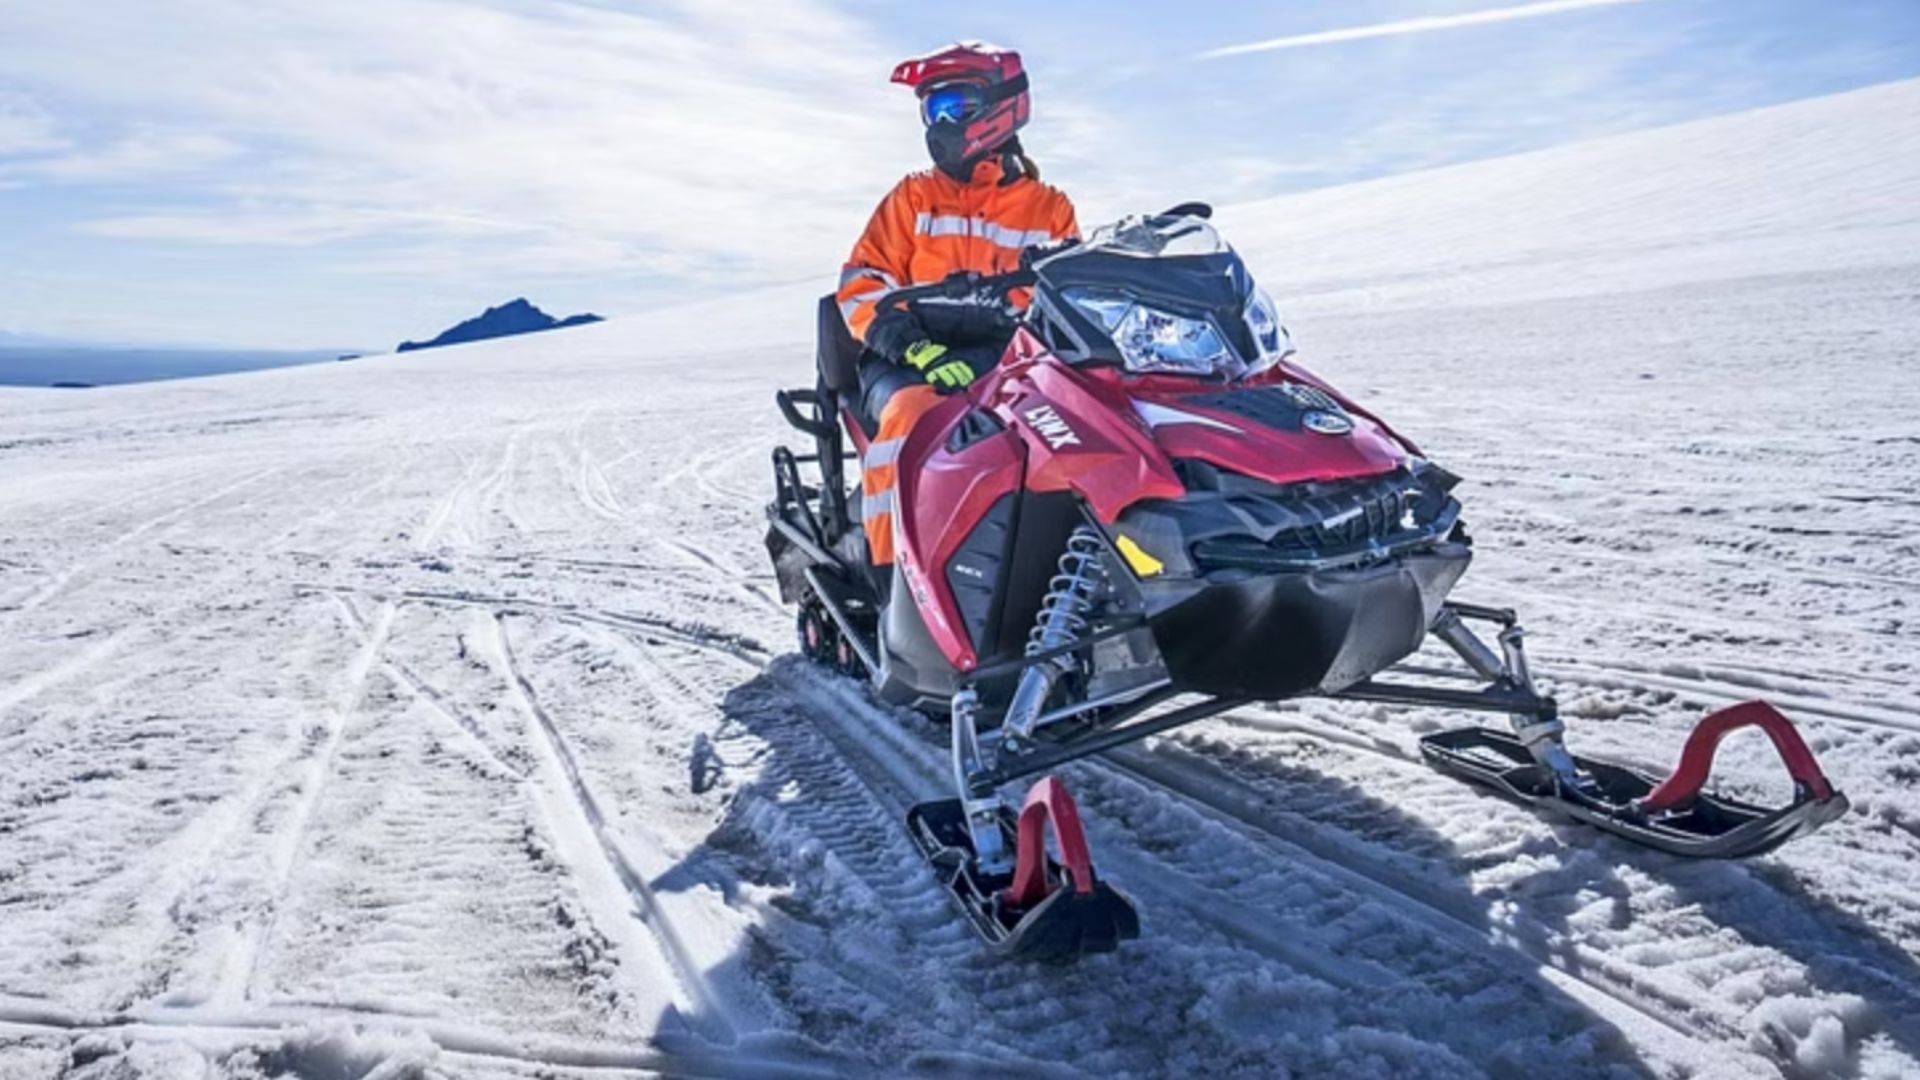 Snowmobile on the glacier in Iceland